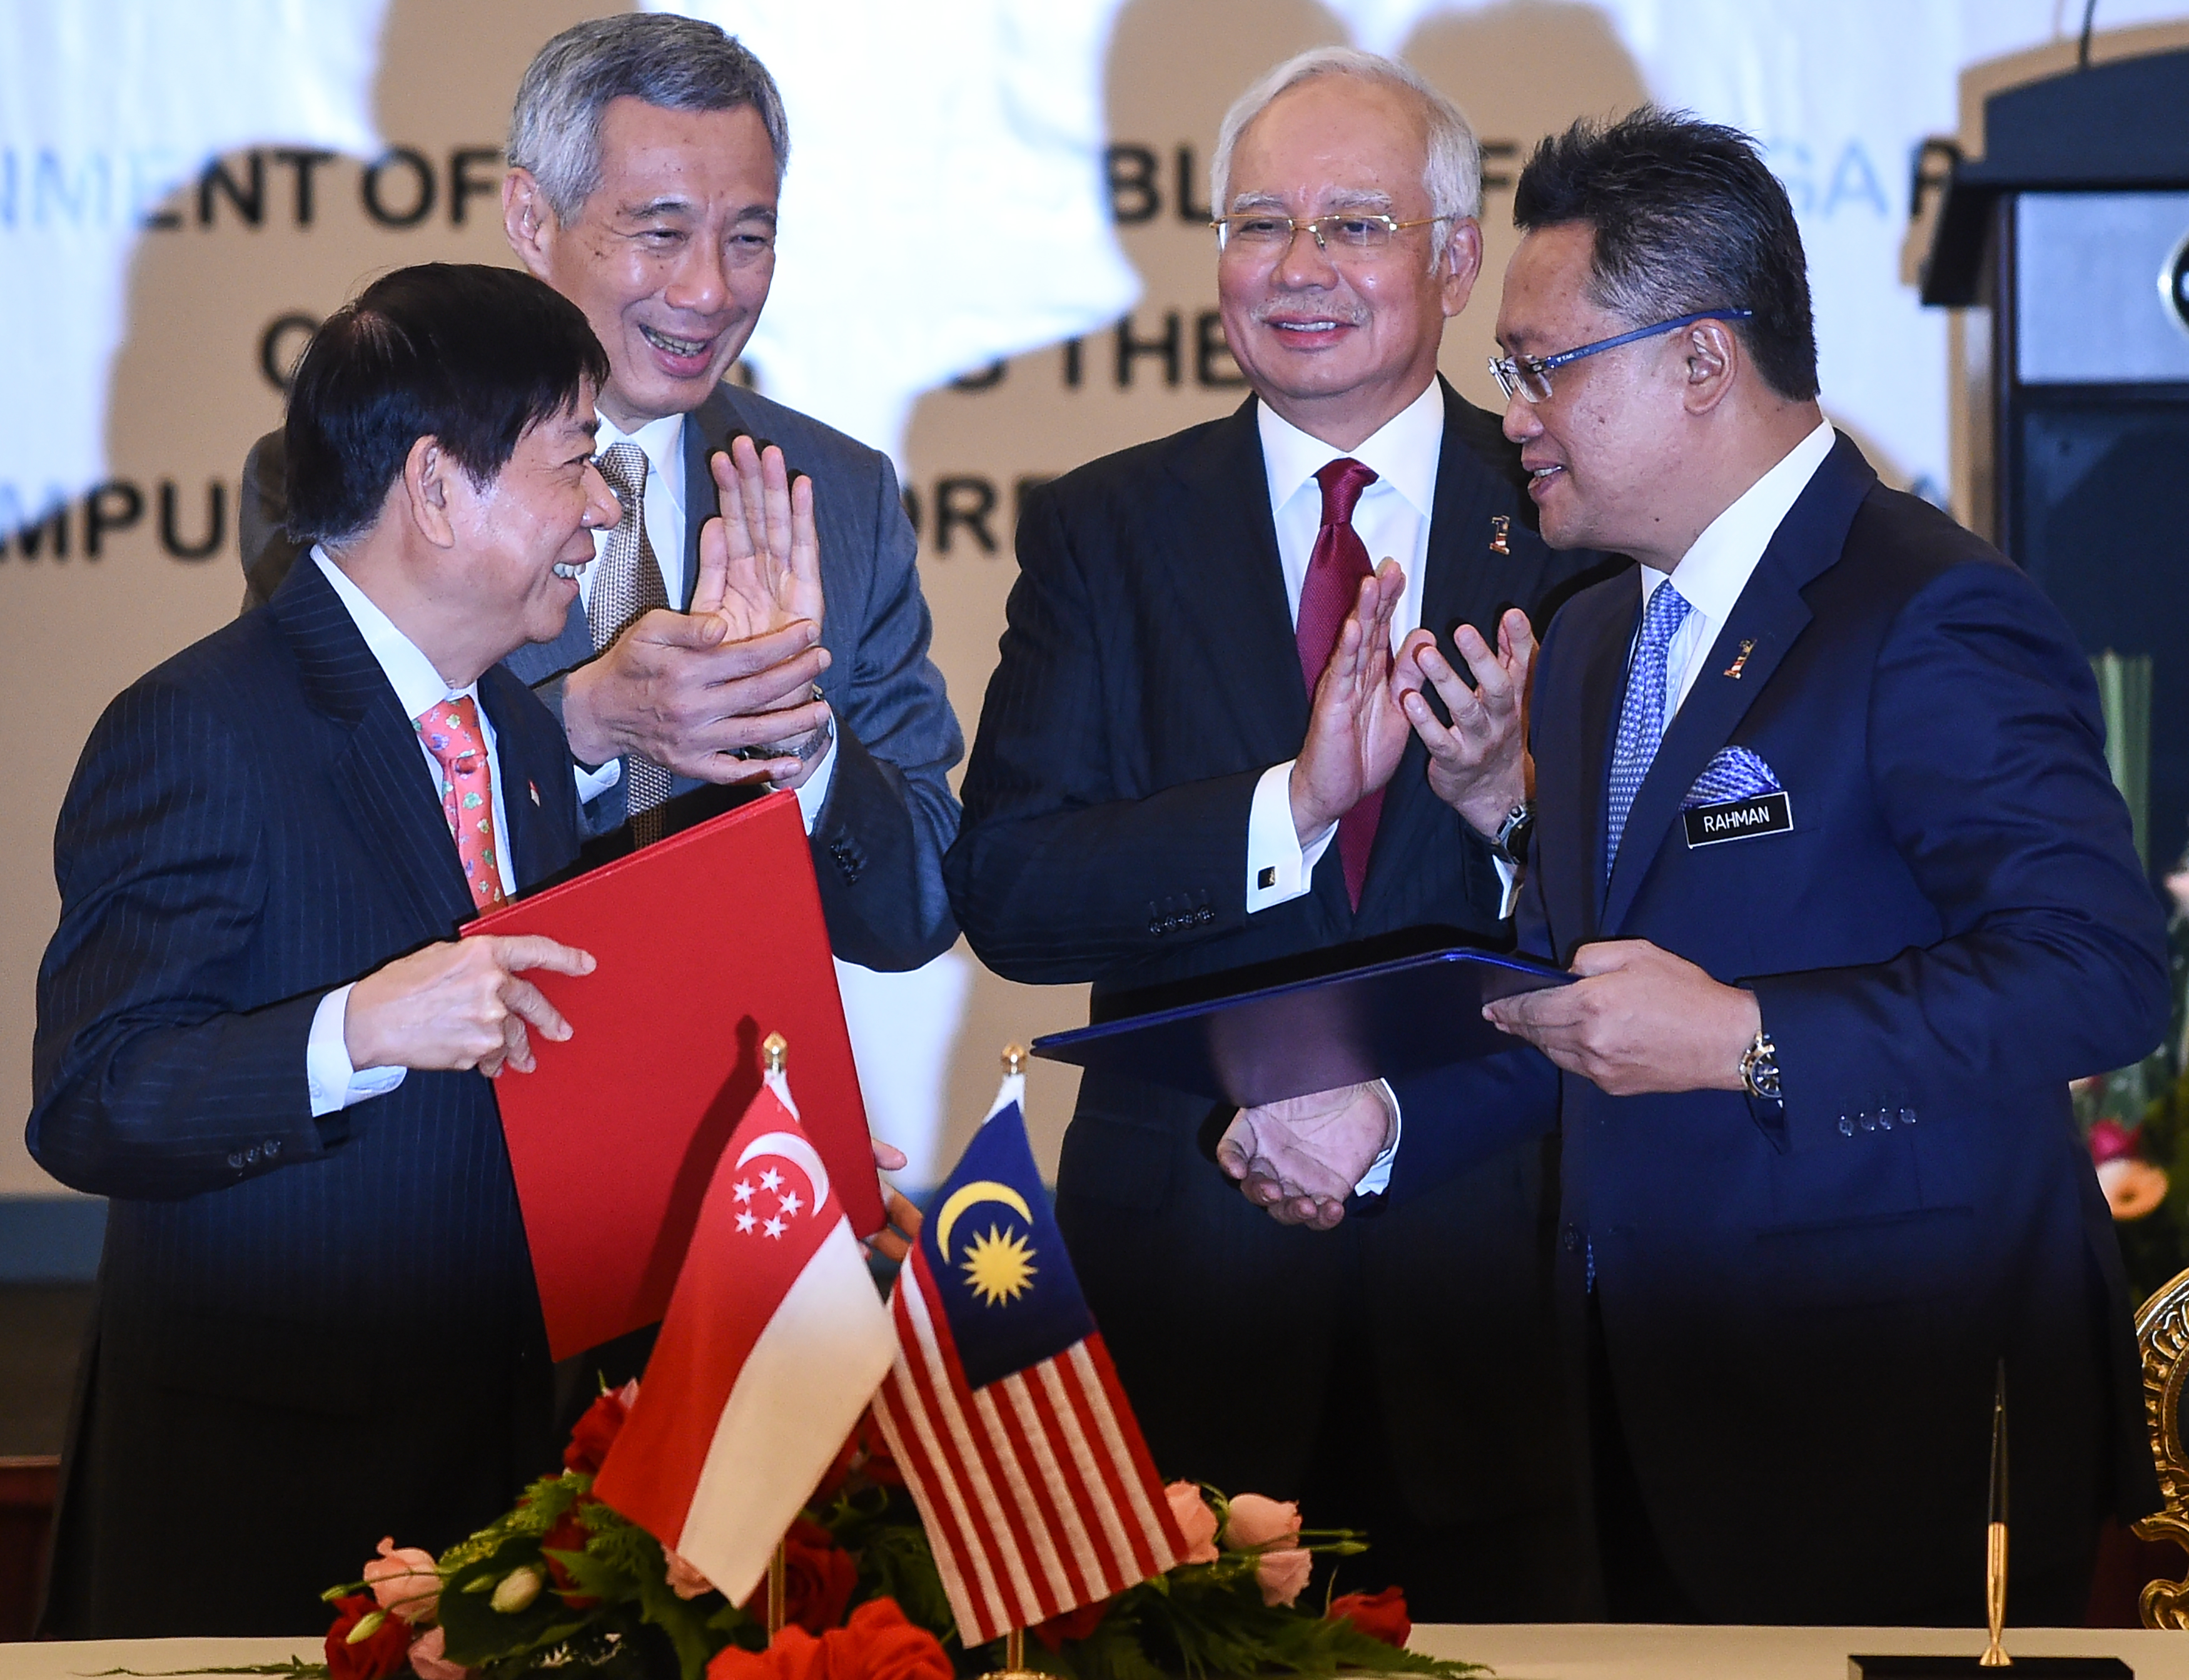 Malaysia's Minister in the Prime Minister's Department Abdul Rahman Dahlan (R) and Singapore's Transport Minister Khaw Boon Wan (L) exchange documents as Malaysia's Prime Minister Najib Razak (2nd R) and Singapore's Prime Minister Lee Hsien Loong (2nd L) applaud during the signing of a memorandum of understanding between the two goverments concerning the Kuala Lumpur-Singapore high-speed rail link, at Najib's official residence in Putrajaya, outside Kuala Lumpur on July 19, 2016. Malaysia and Singapore signed an agreement on July 19 to build an ambitious high-speed rail link touted as a first for Southeast Asia that will knit the historically fractious neighbours more closely together. / AFP PHOTO / MOHD RASFAN